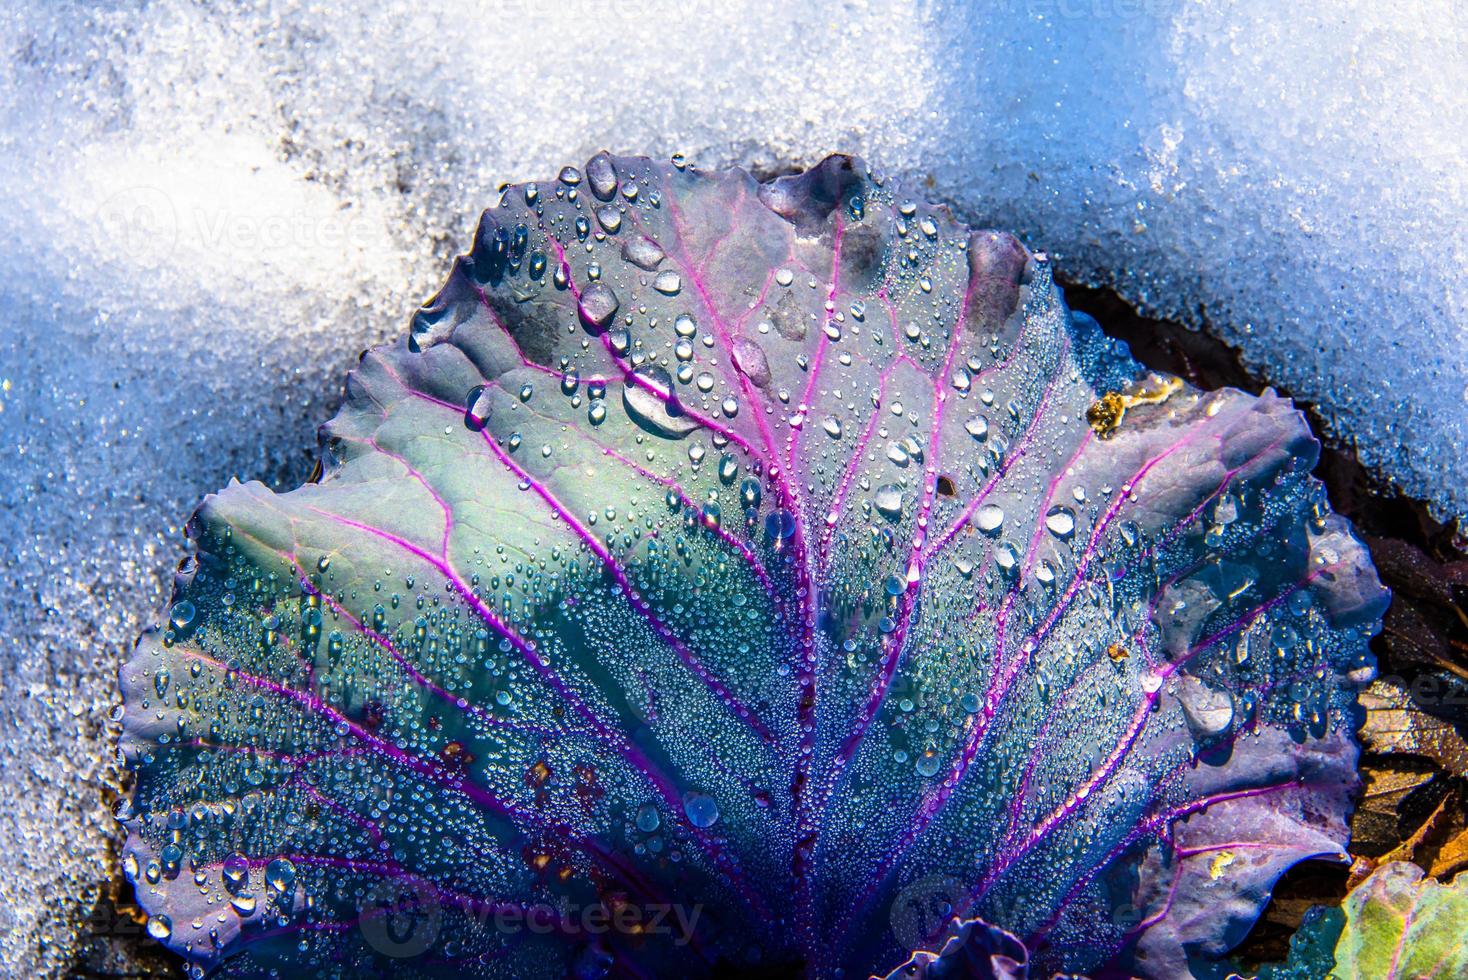 cabbage leaf in the snow photo